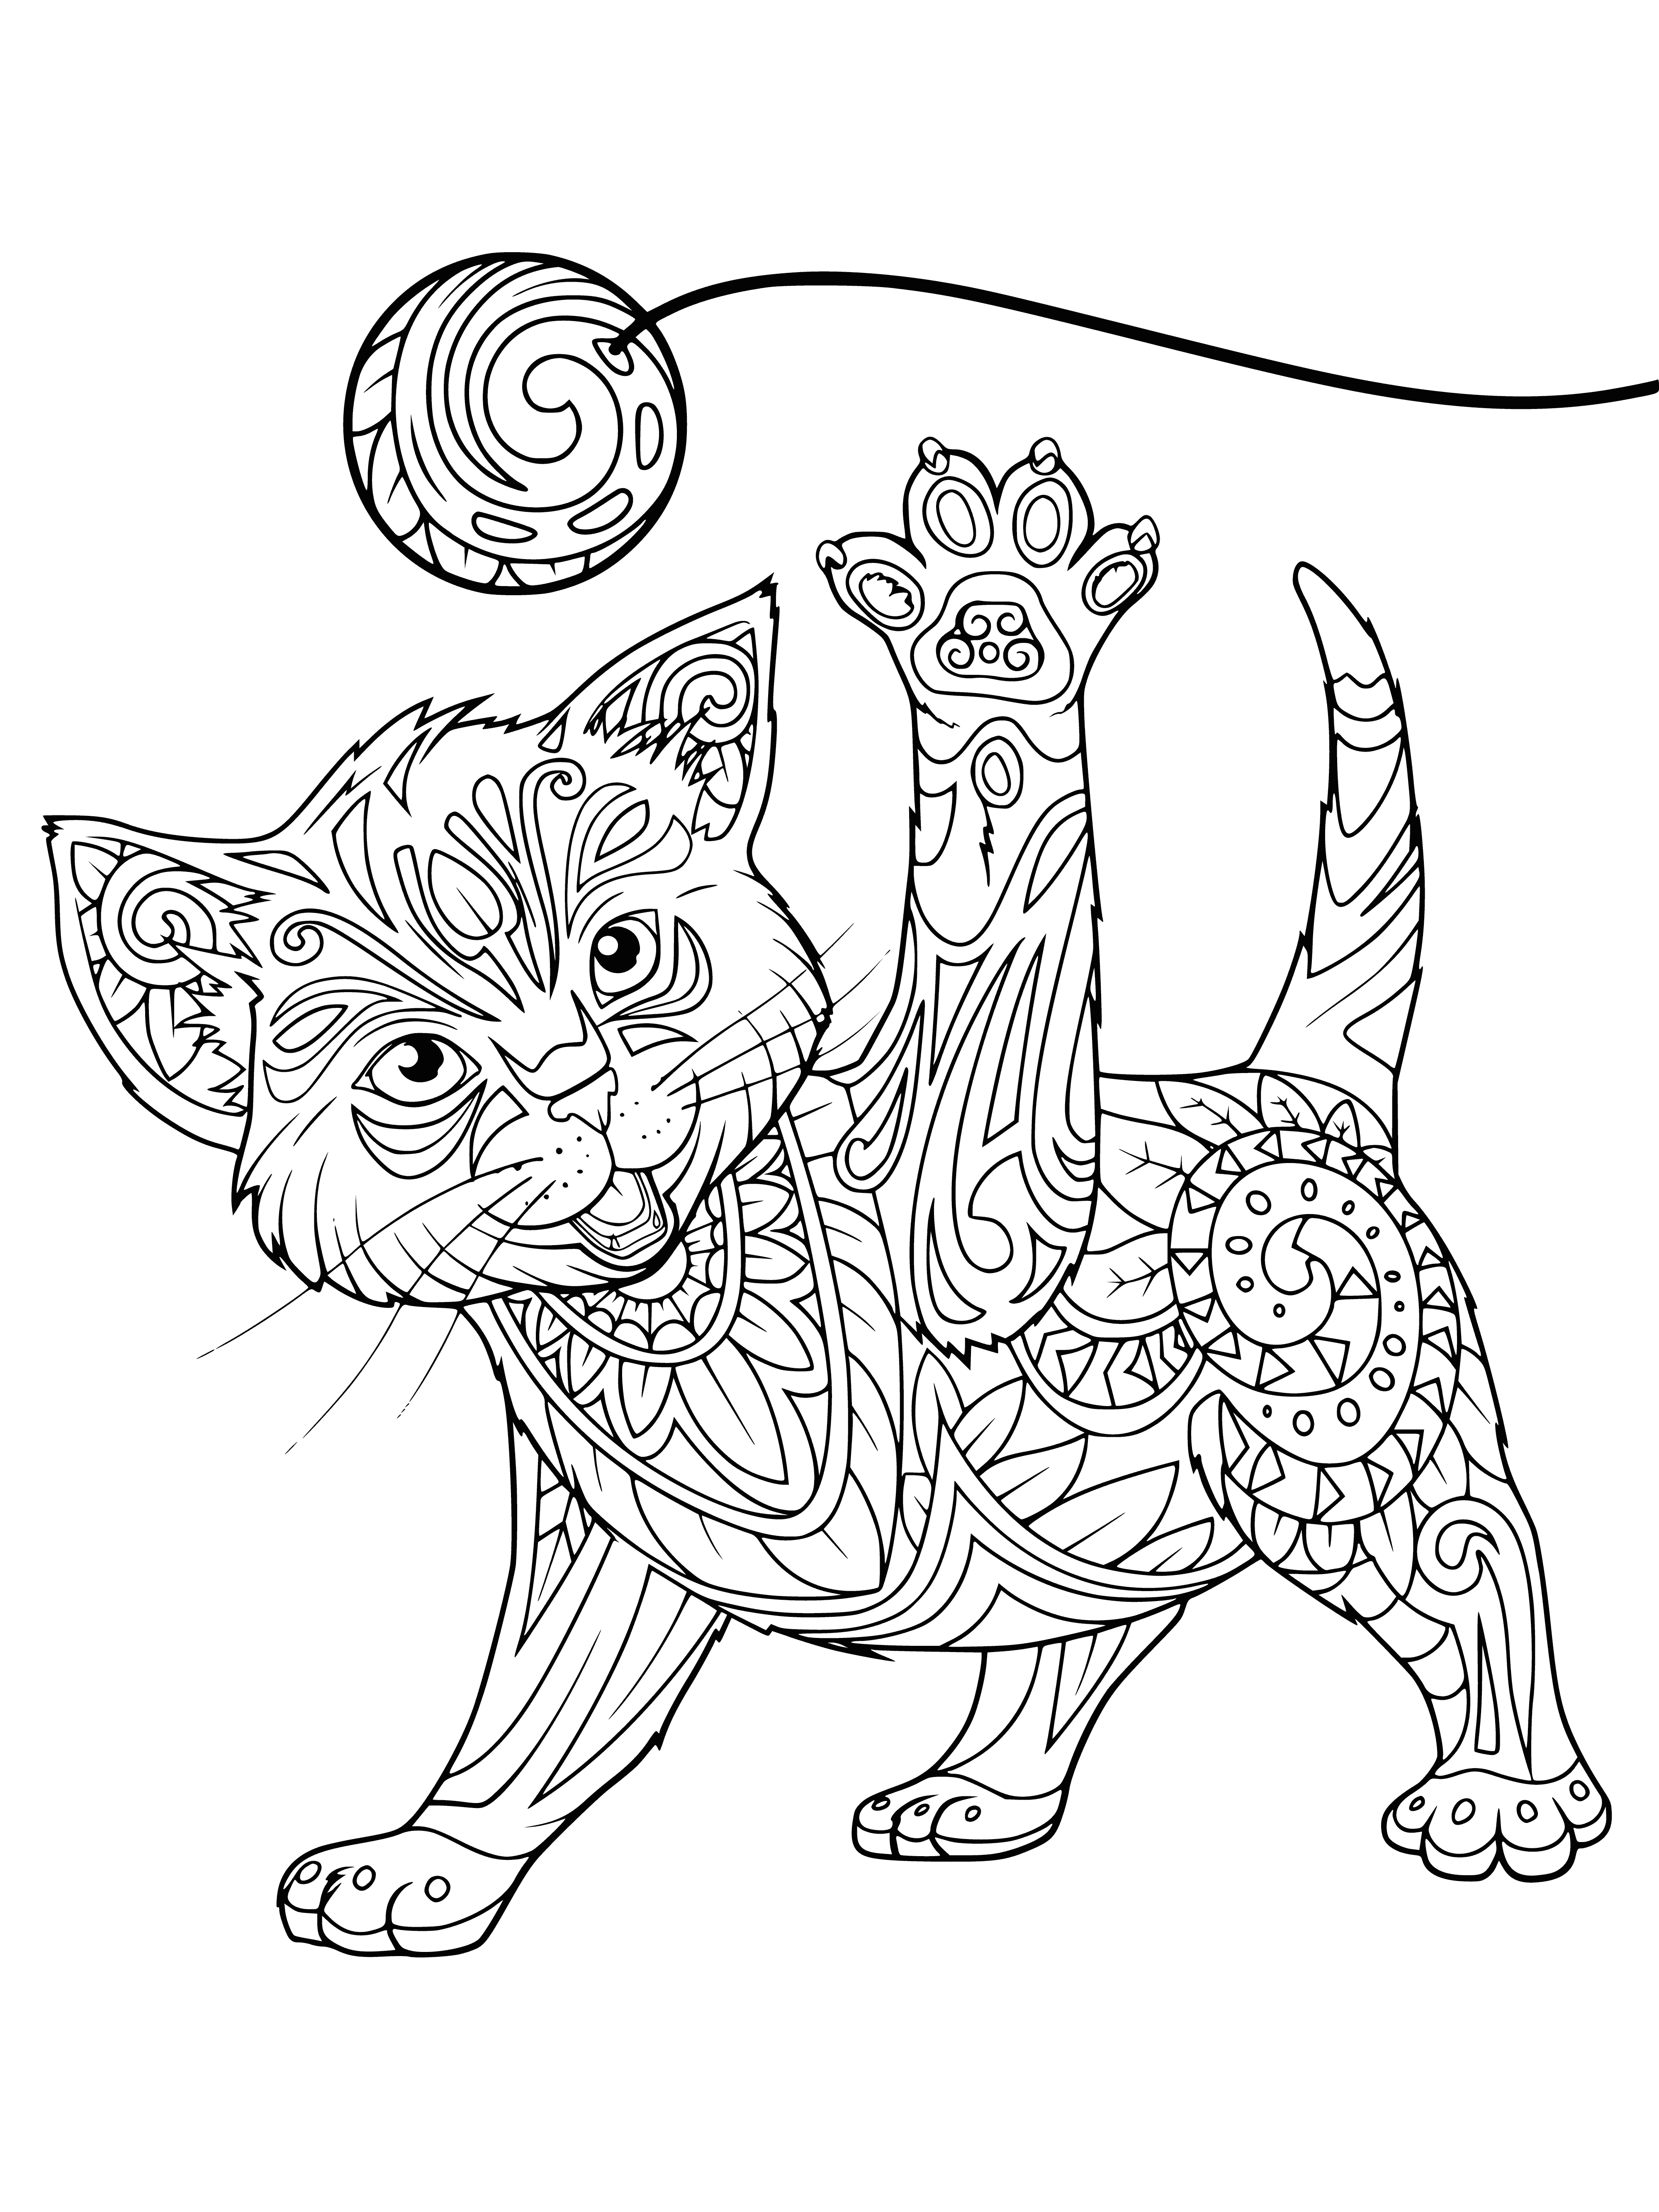 Kitten playing with a clew coloring page